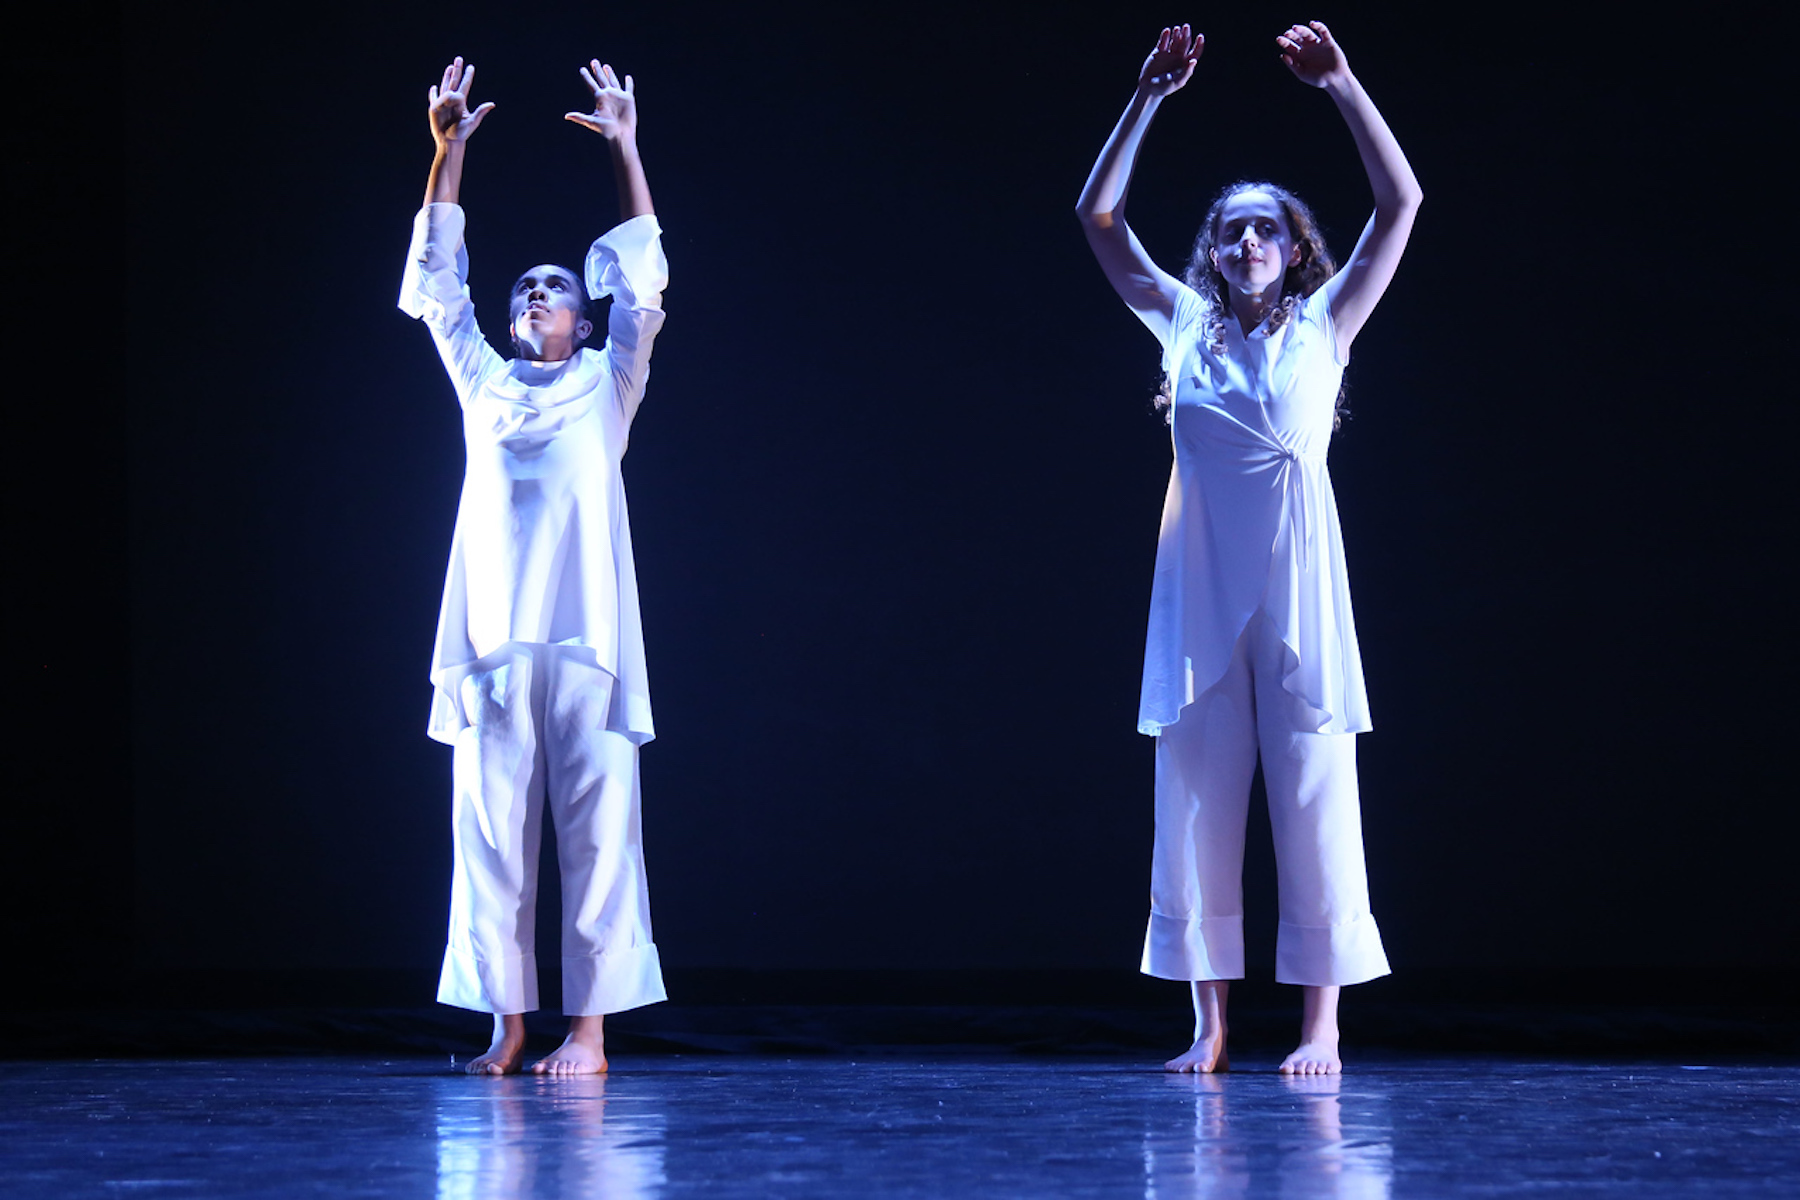 Two Fieldston Upper Dancers perform on stage. They reach their arms up to the ceiling, and wear all white clothing.